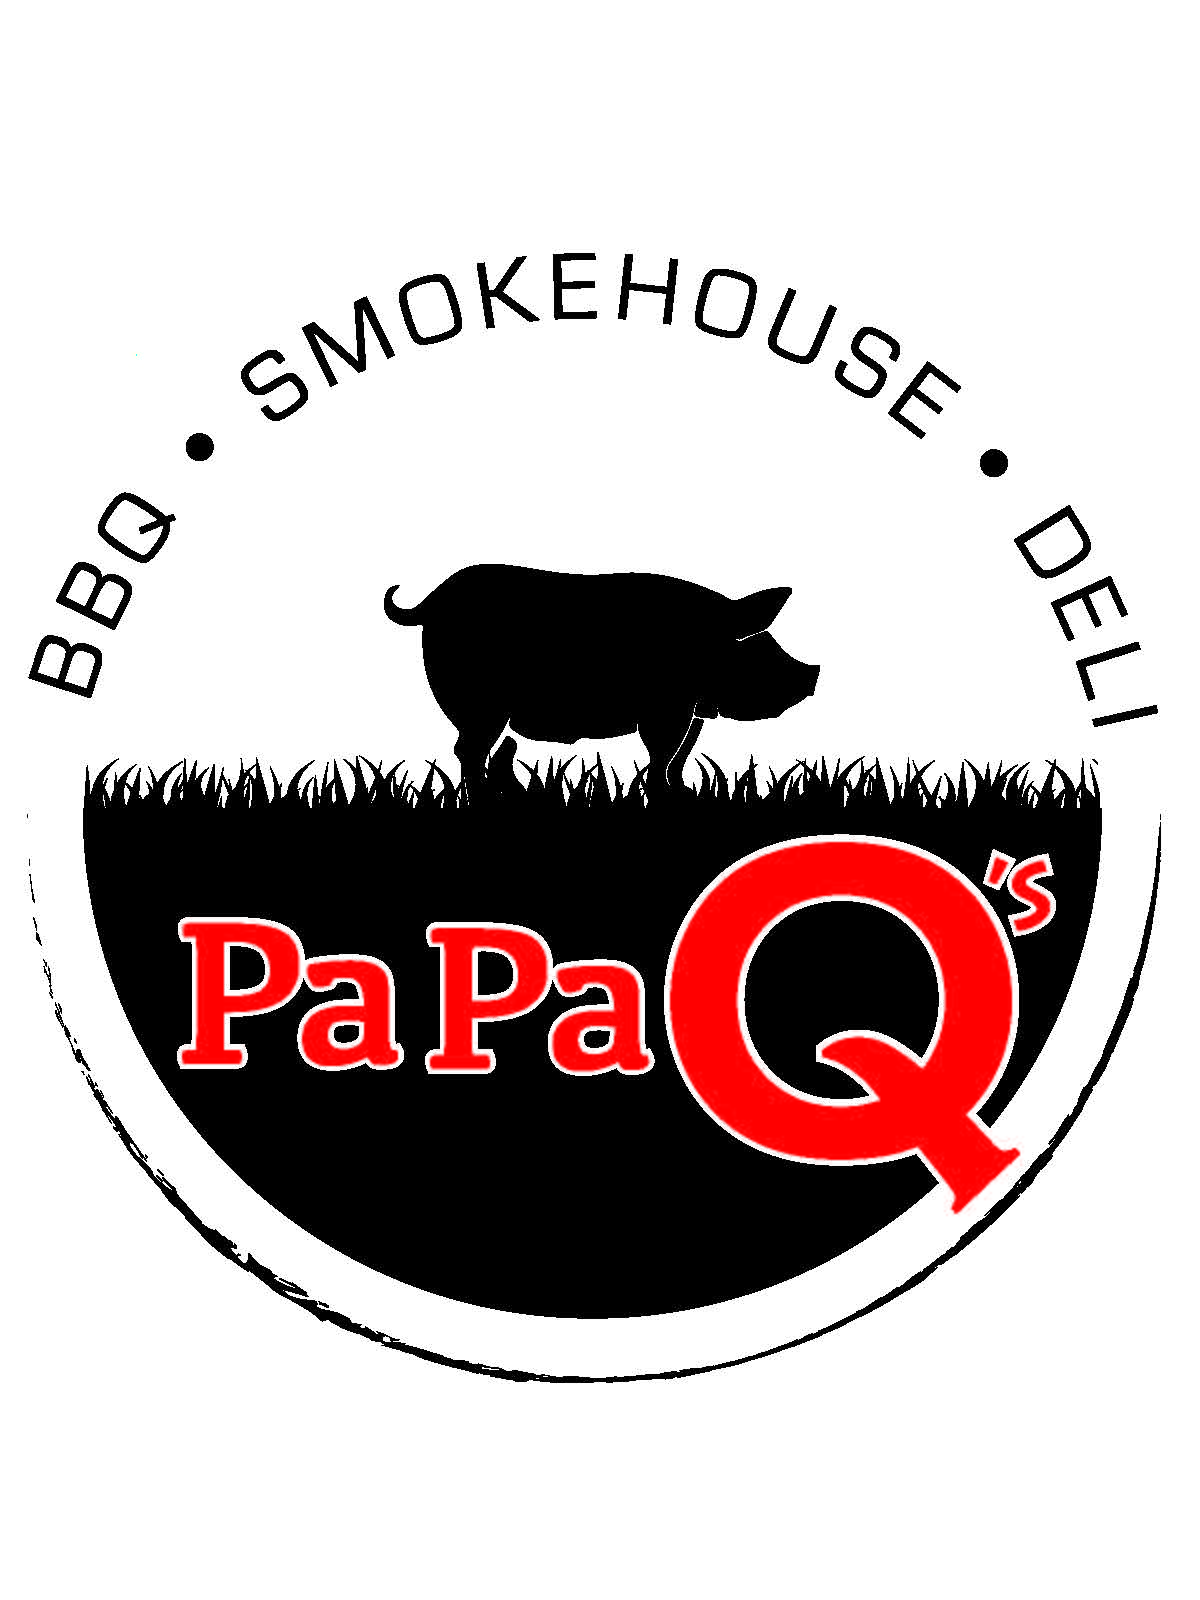 PaPa Q's BBQ, Smokehouse, and Deli in red text next to black pig shape